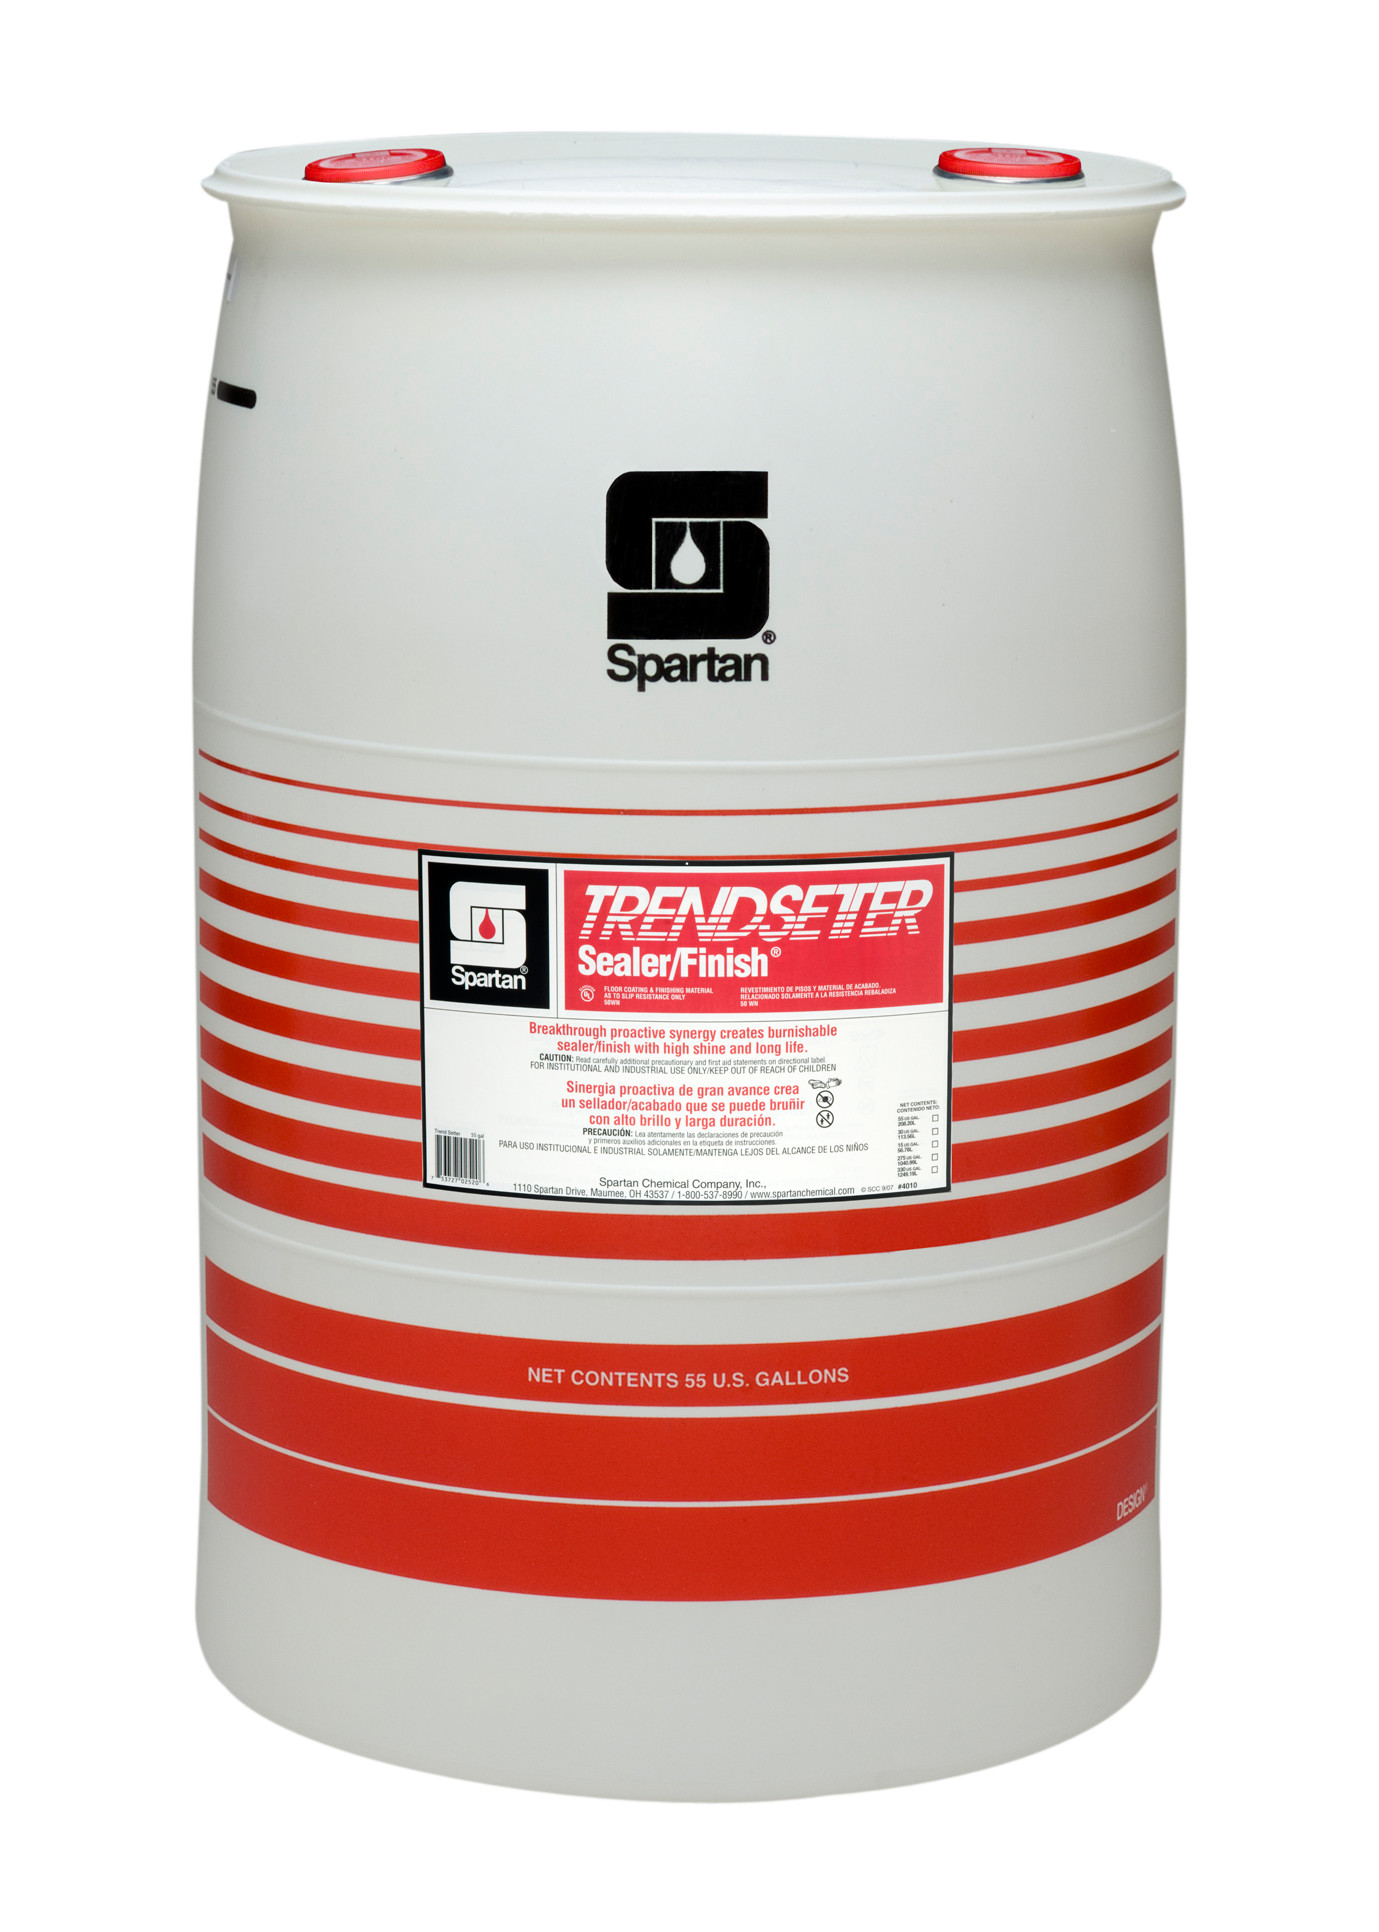 Spartan Chemical Company Trendsetter Sealer/Finish, 55 GAL DRUM